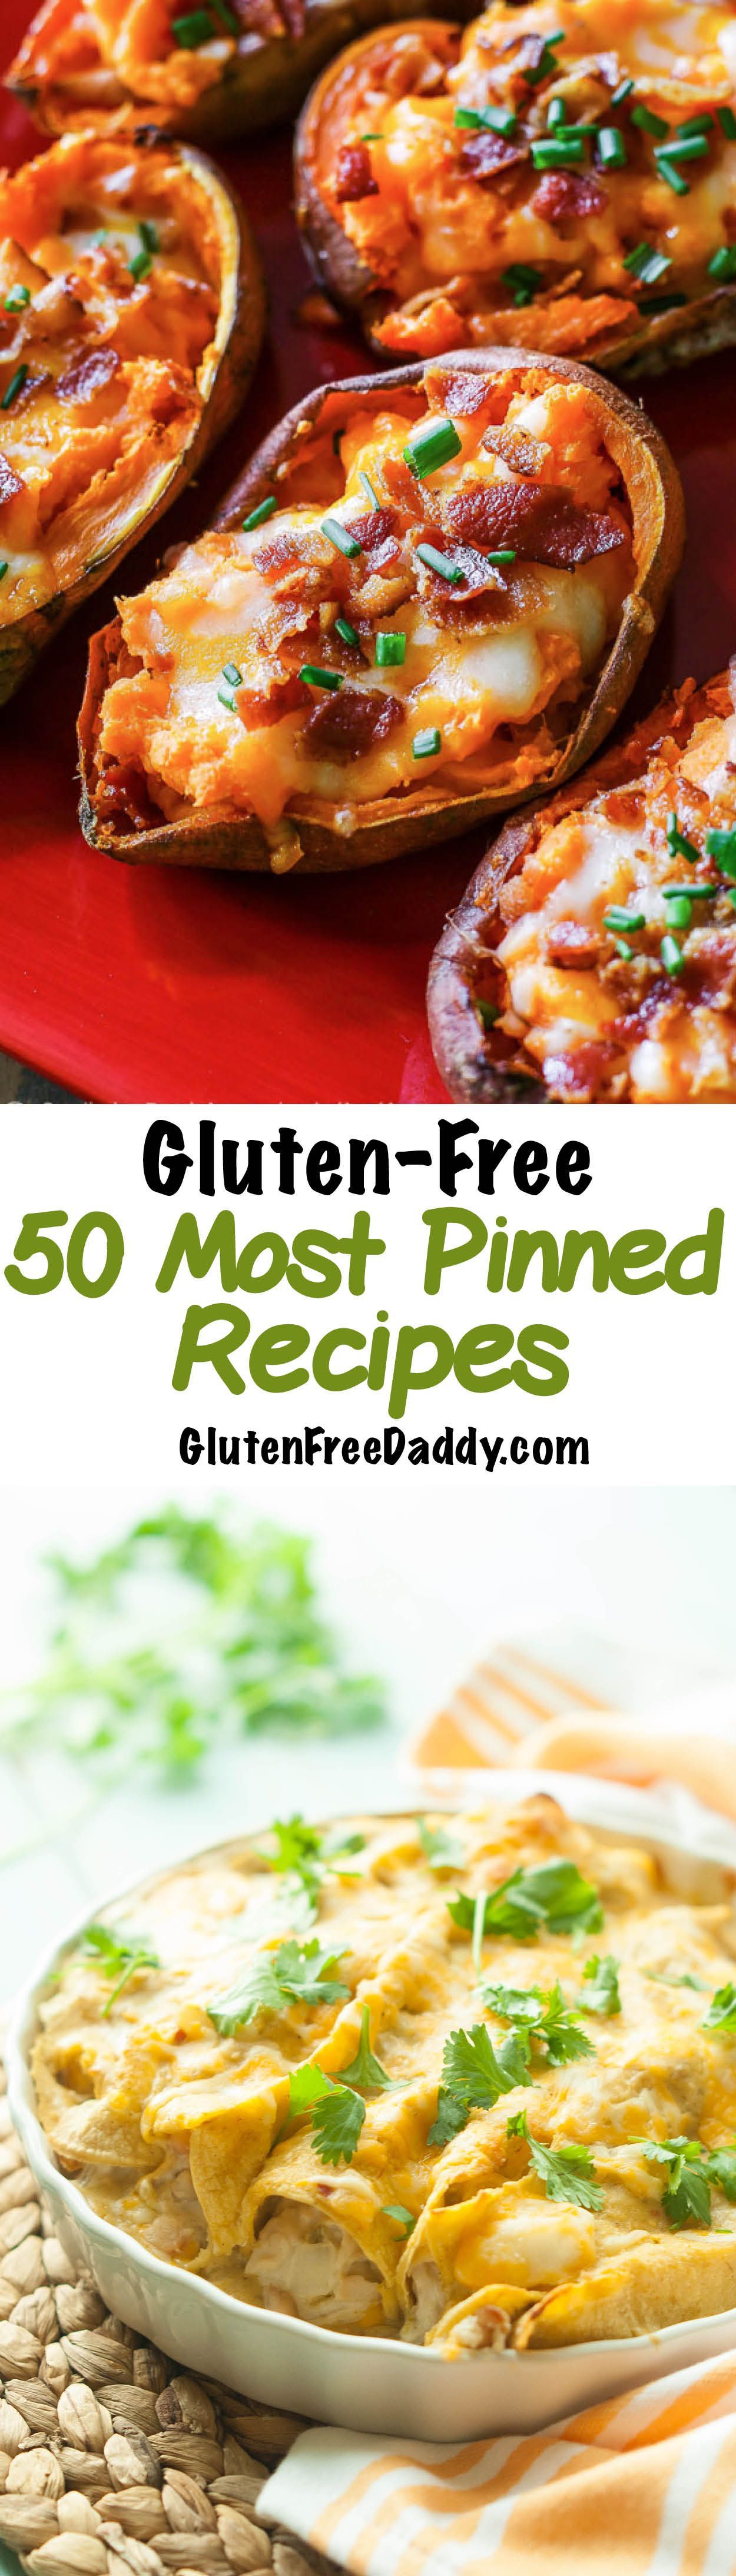 The 50 Most Pinned Gluten Free Recipes – I cant believe these are all gluten free! There are so many good options on this page –